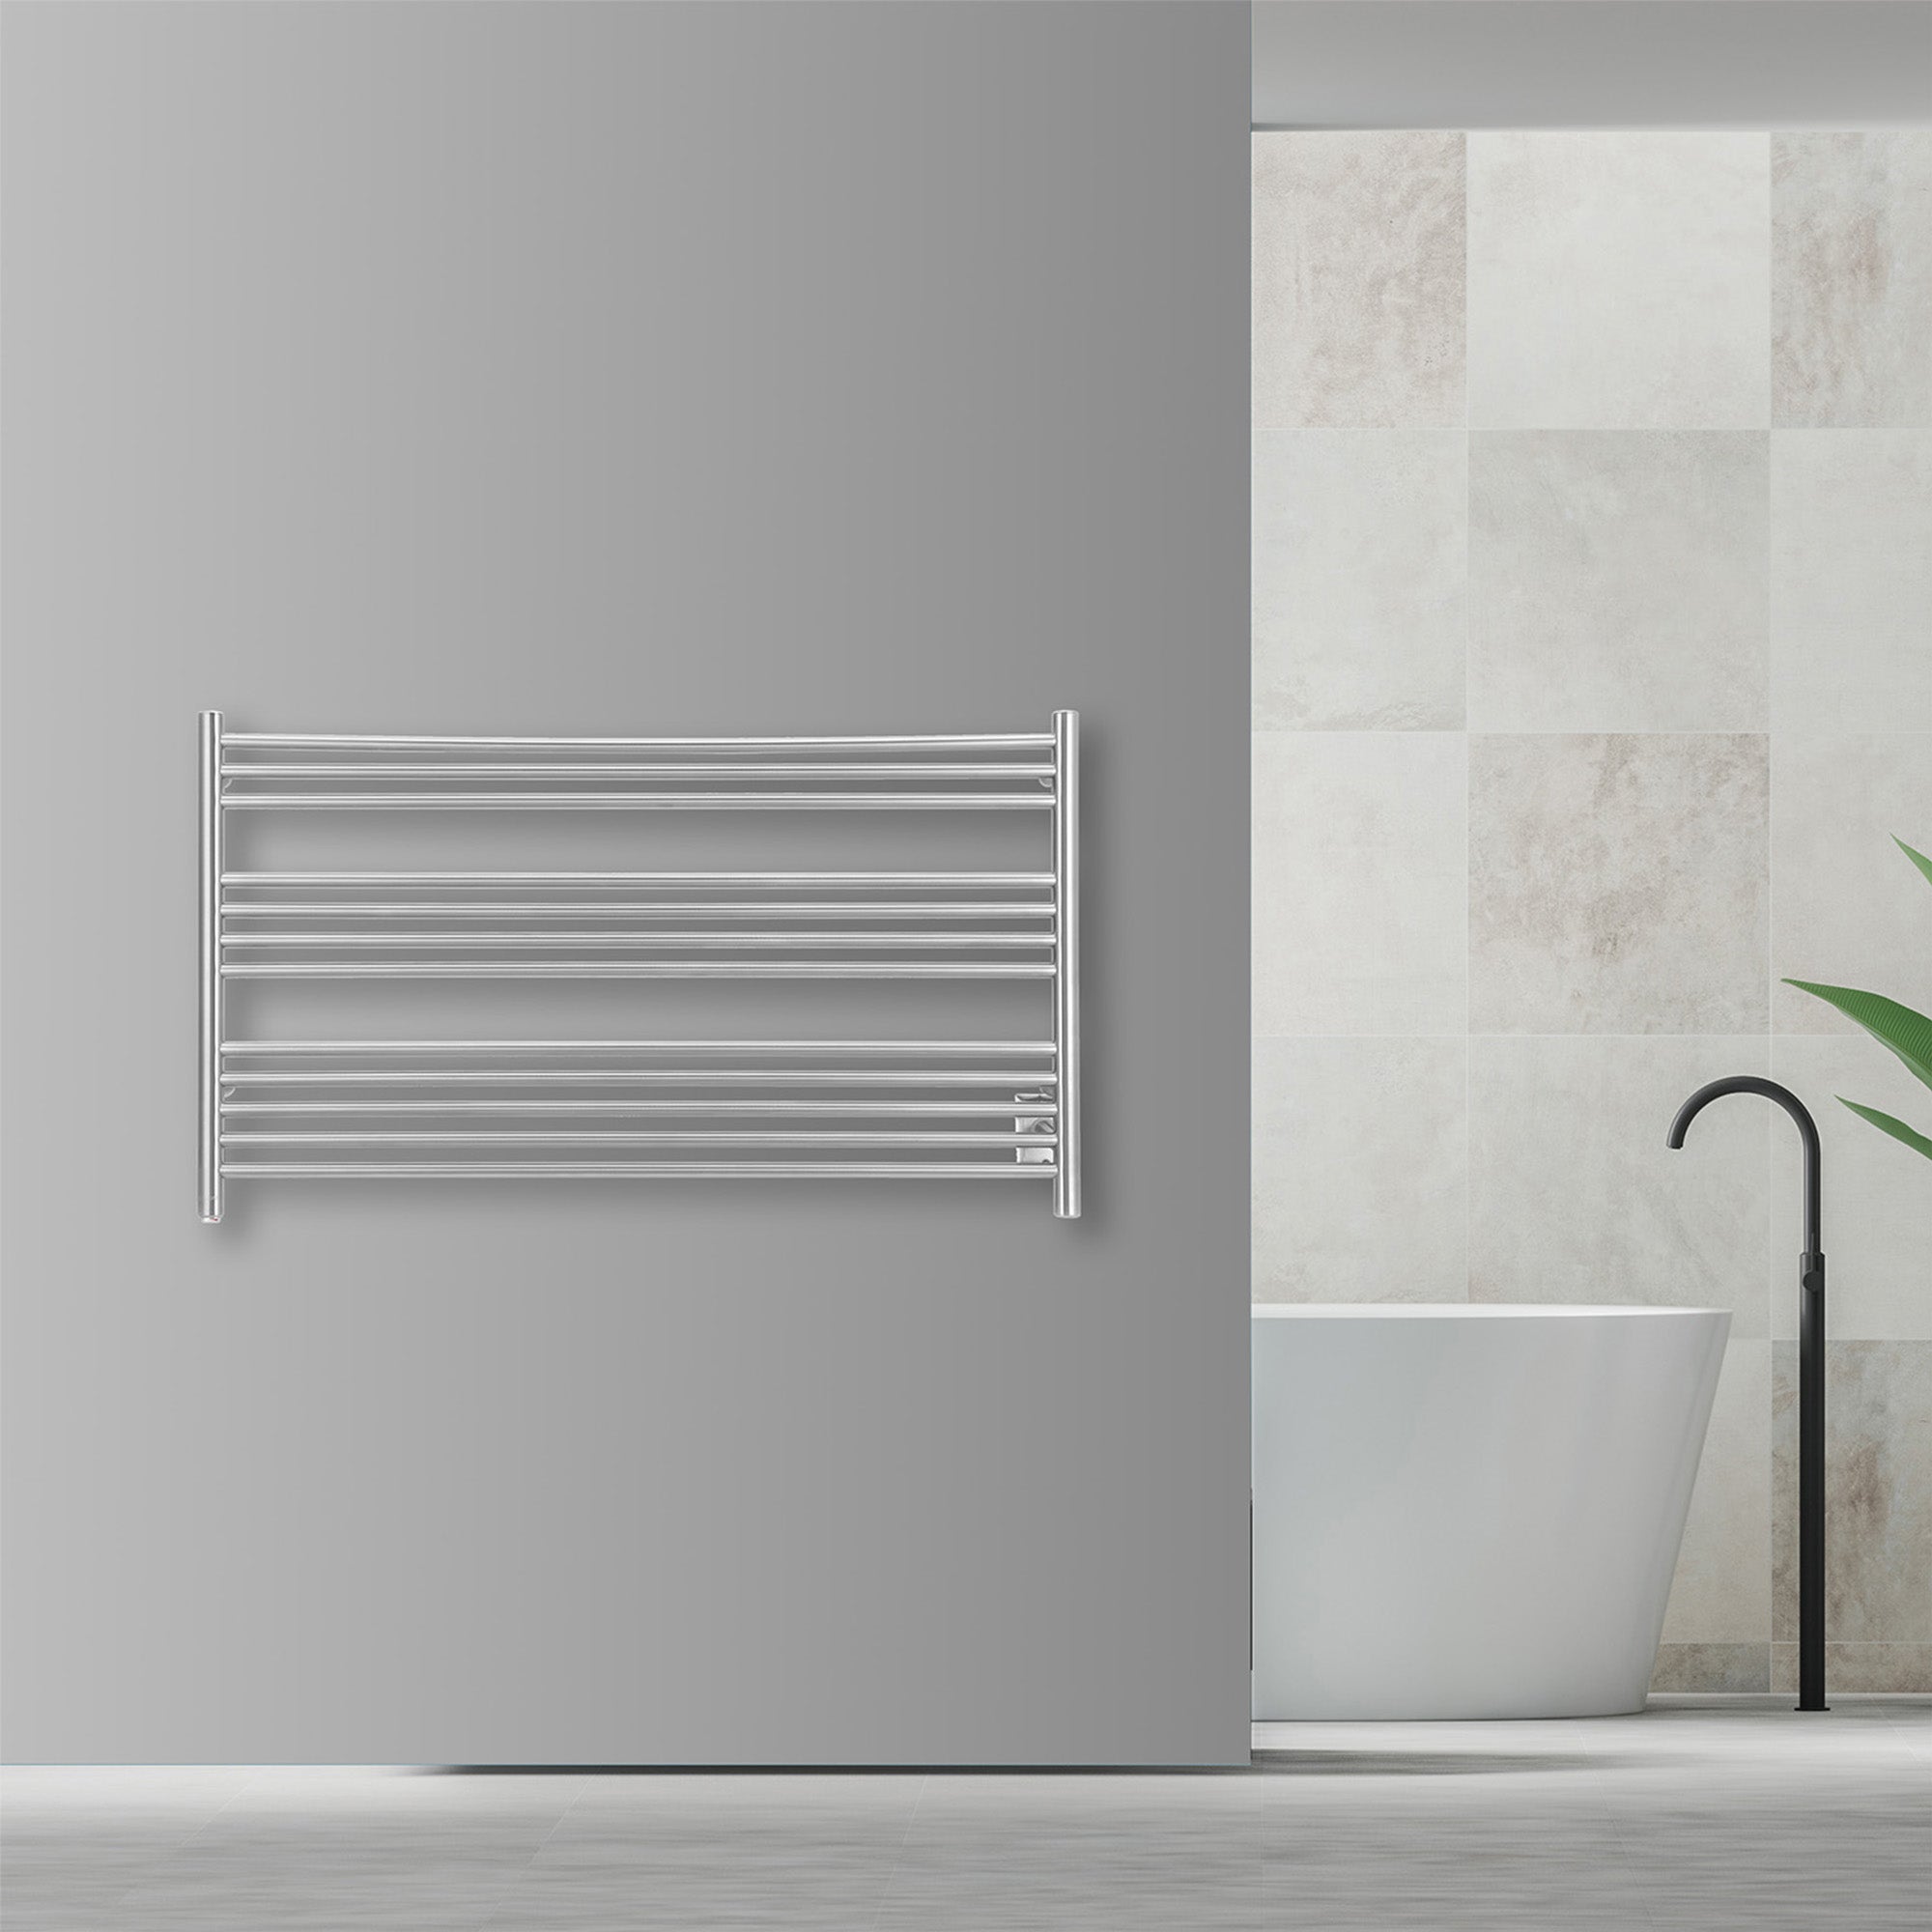 Amplia Dual 12-Bar Hardwired and Plug-in Towel Warmer in Brushed Stainless Steel